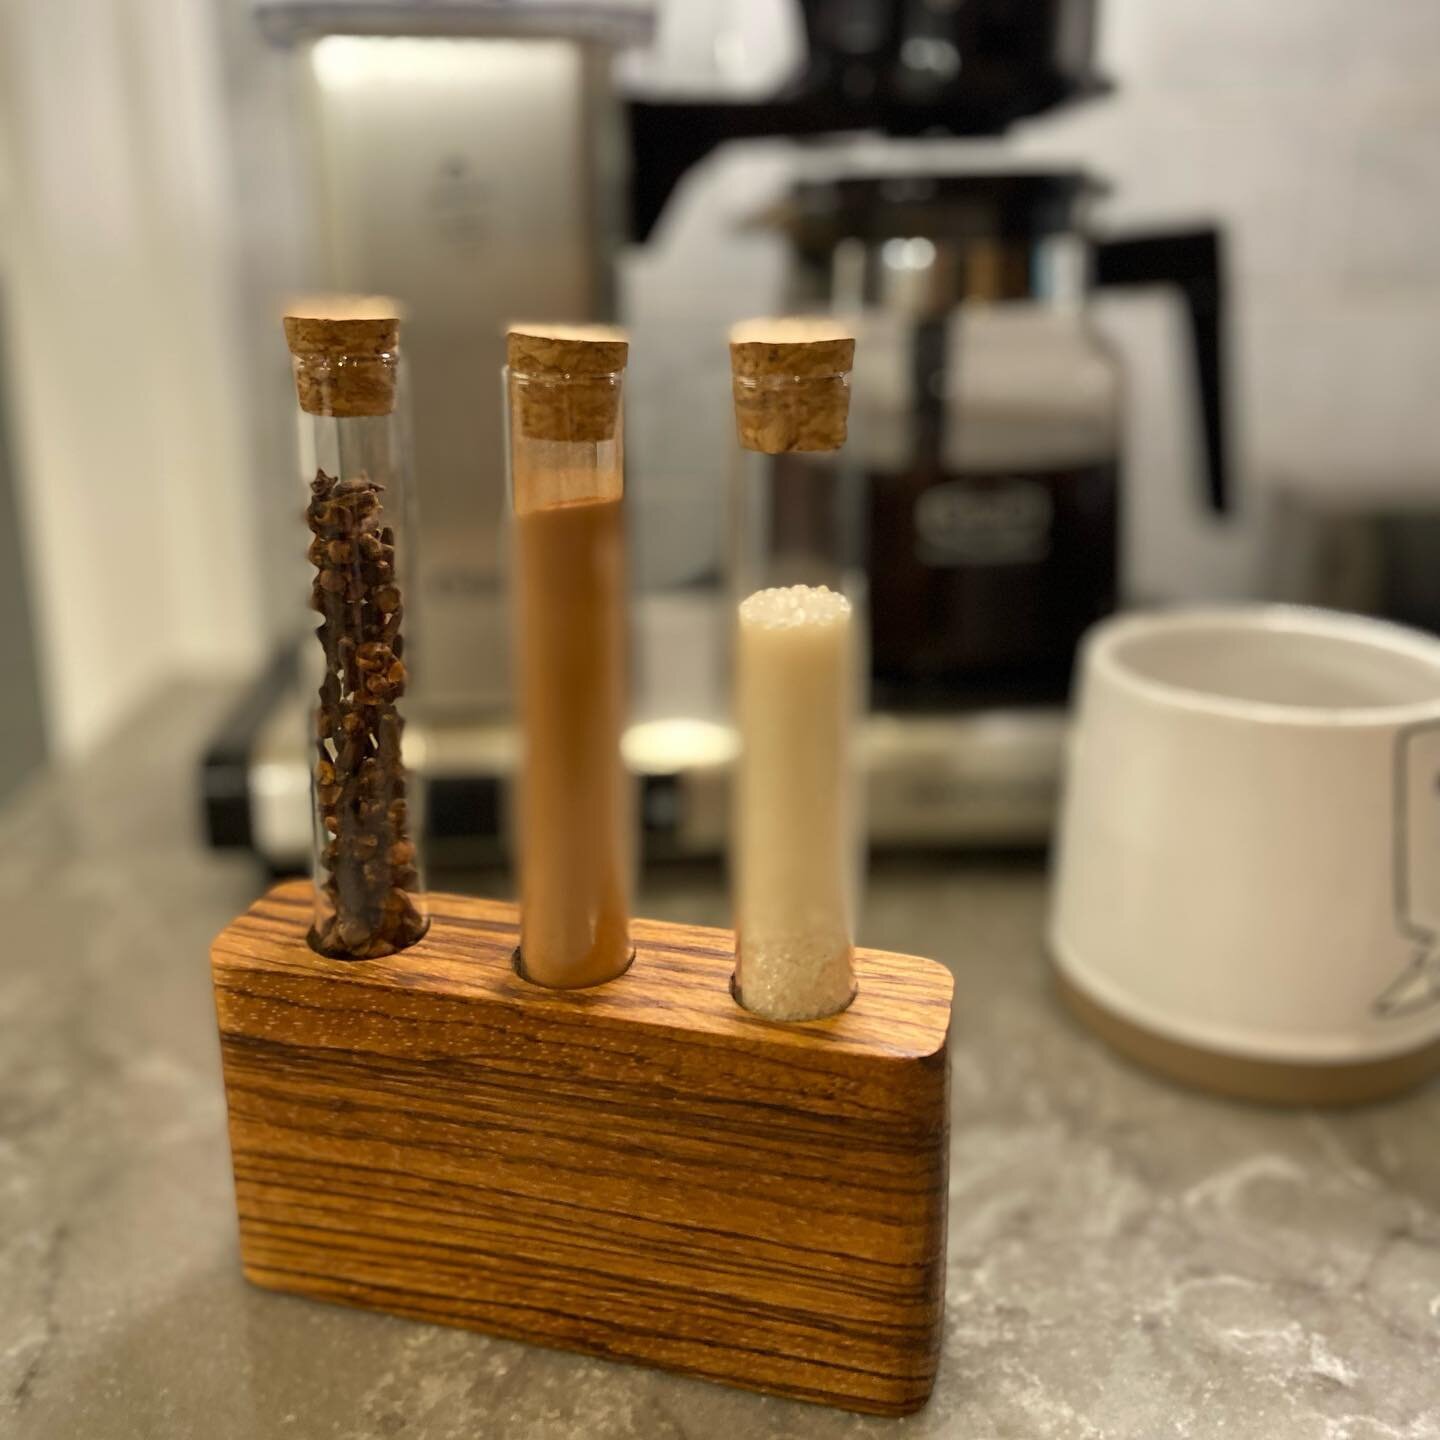 I am feeling really proud of how this simple spice rack turned out and I love the look of the Zebrawood! Only thing is, we can&rsquo;t decide if we should use it for cooking spices or at our coffee station. What do you think??
.
.
.
#woodworking #kit